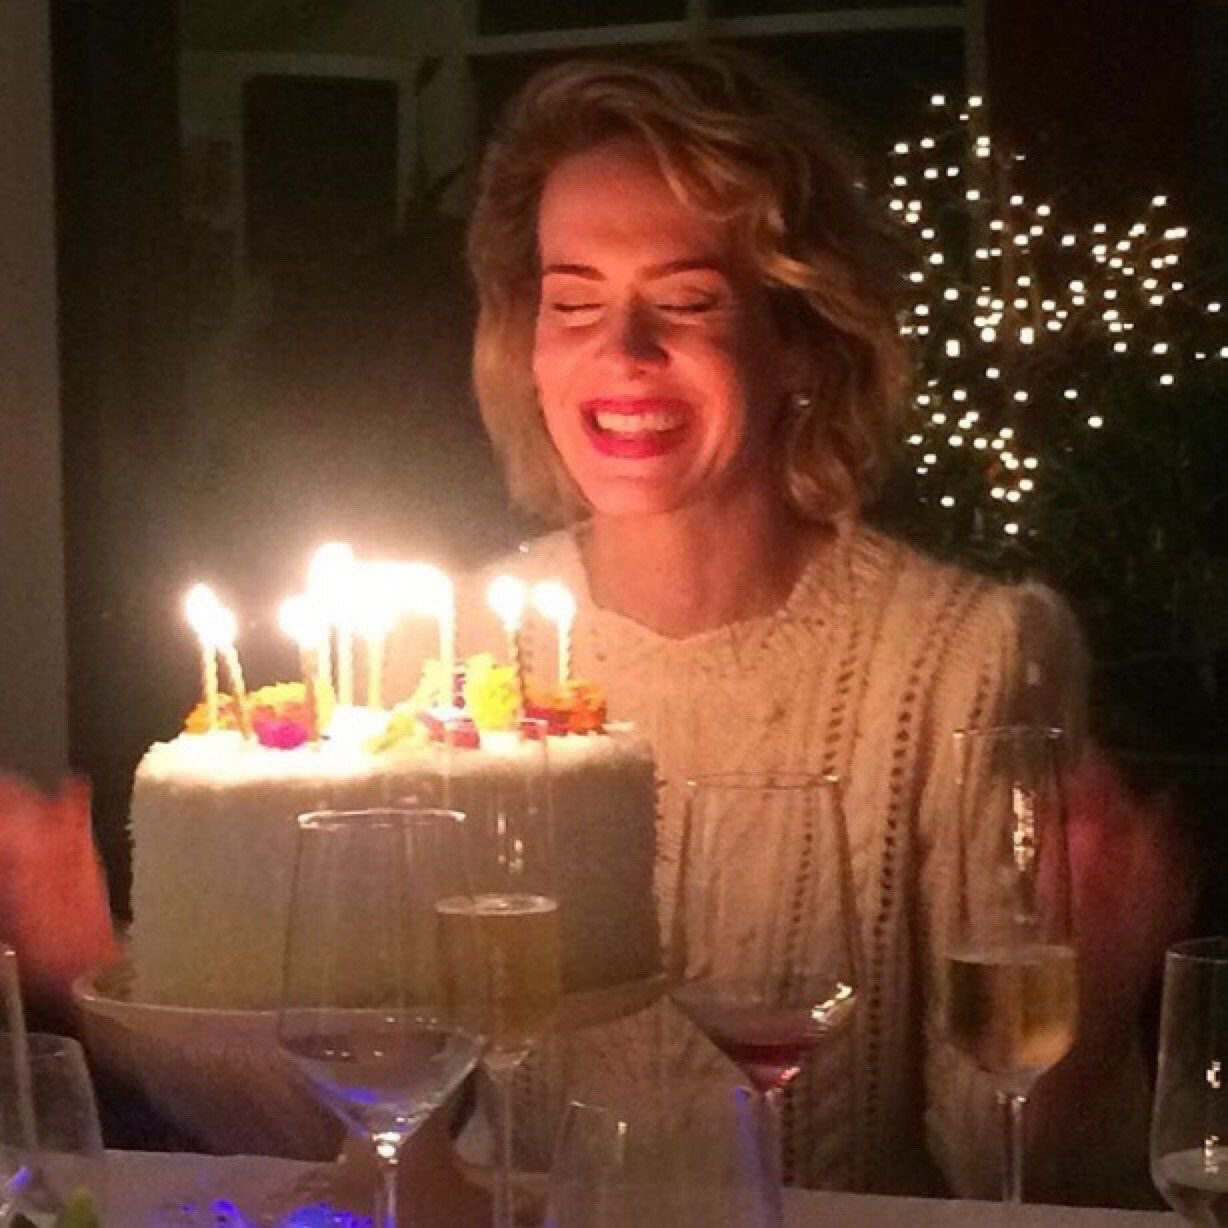 Happy birthday to our queen sarah paulson! hope you have the best day. we all love u so much <3 